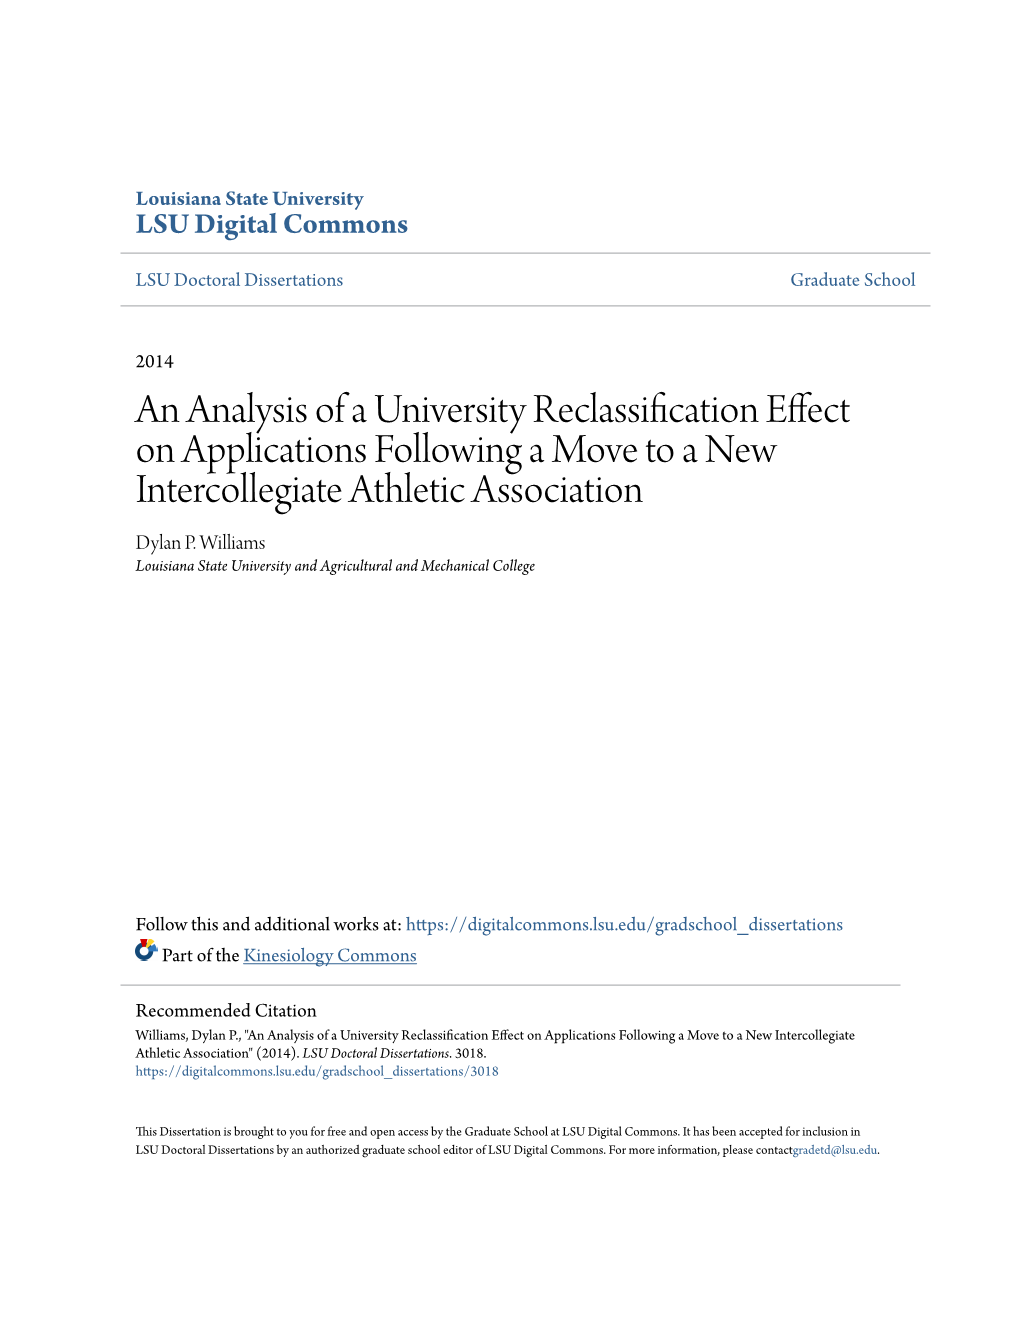 An Analysis of a University Reclassification Effect on Applications Following a Move to a New Intercollegiate Athletic Association Dylan P